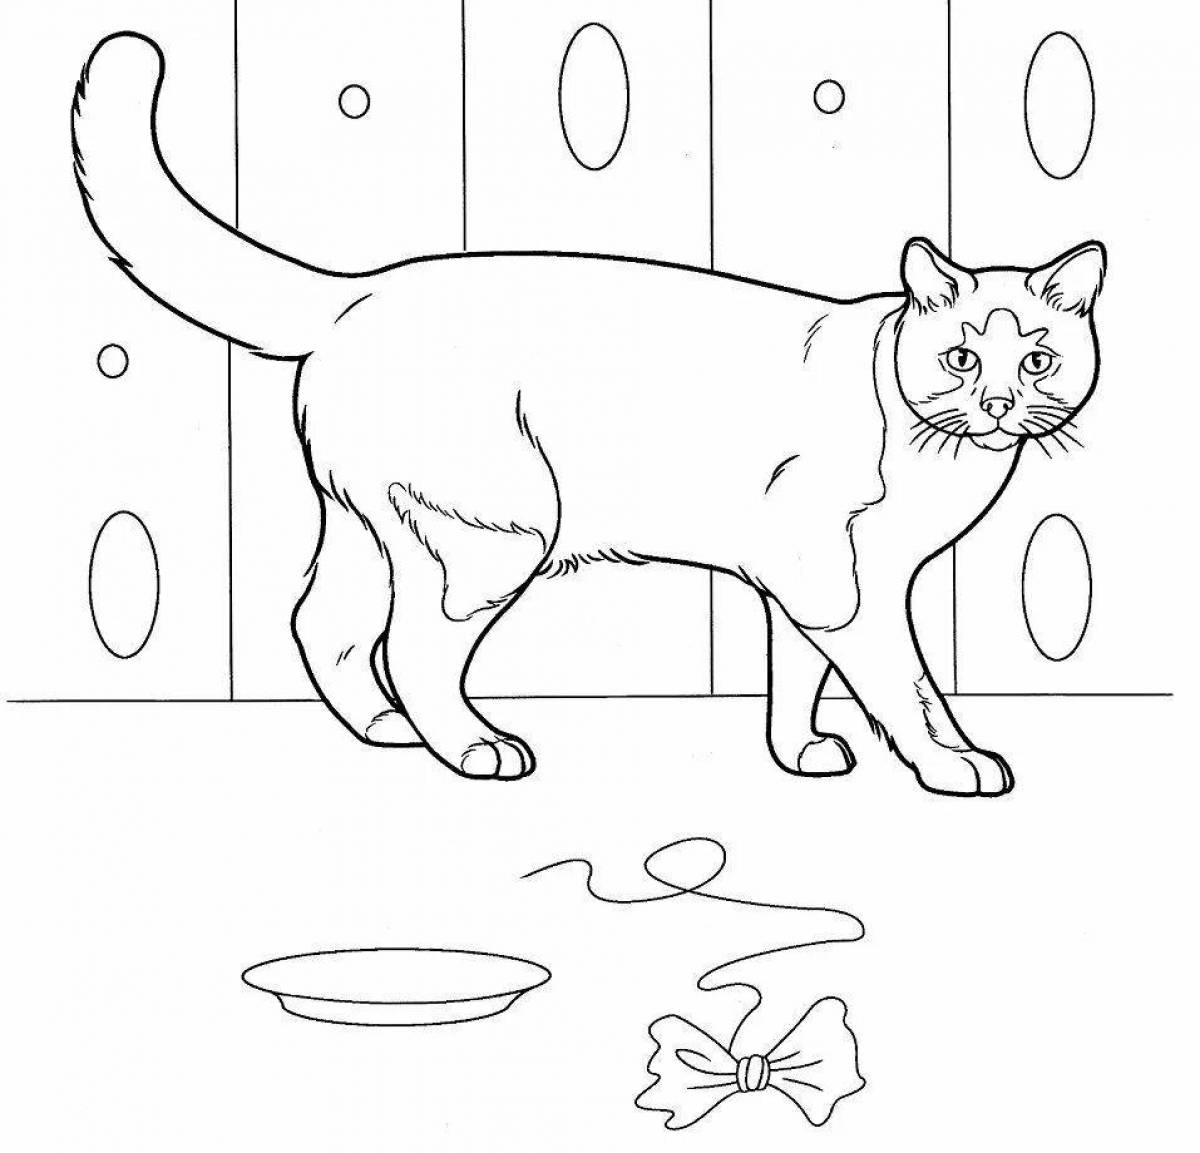 Coloring page inquisitive sitting cat